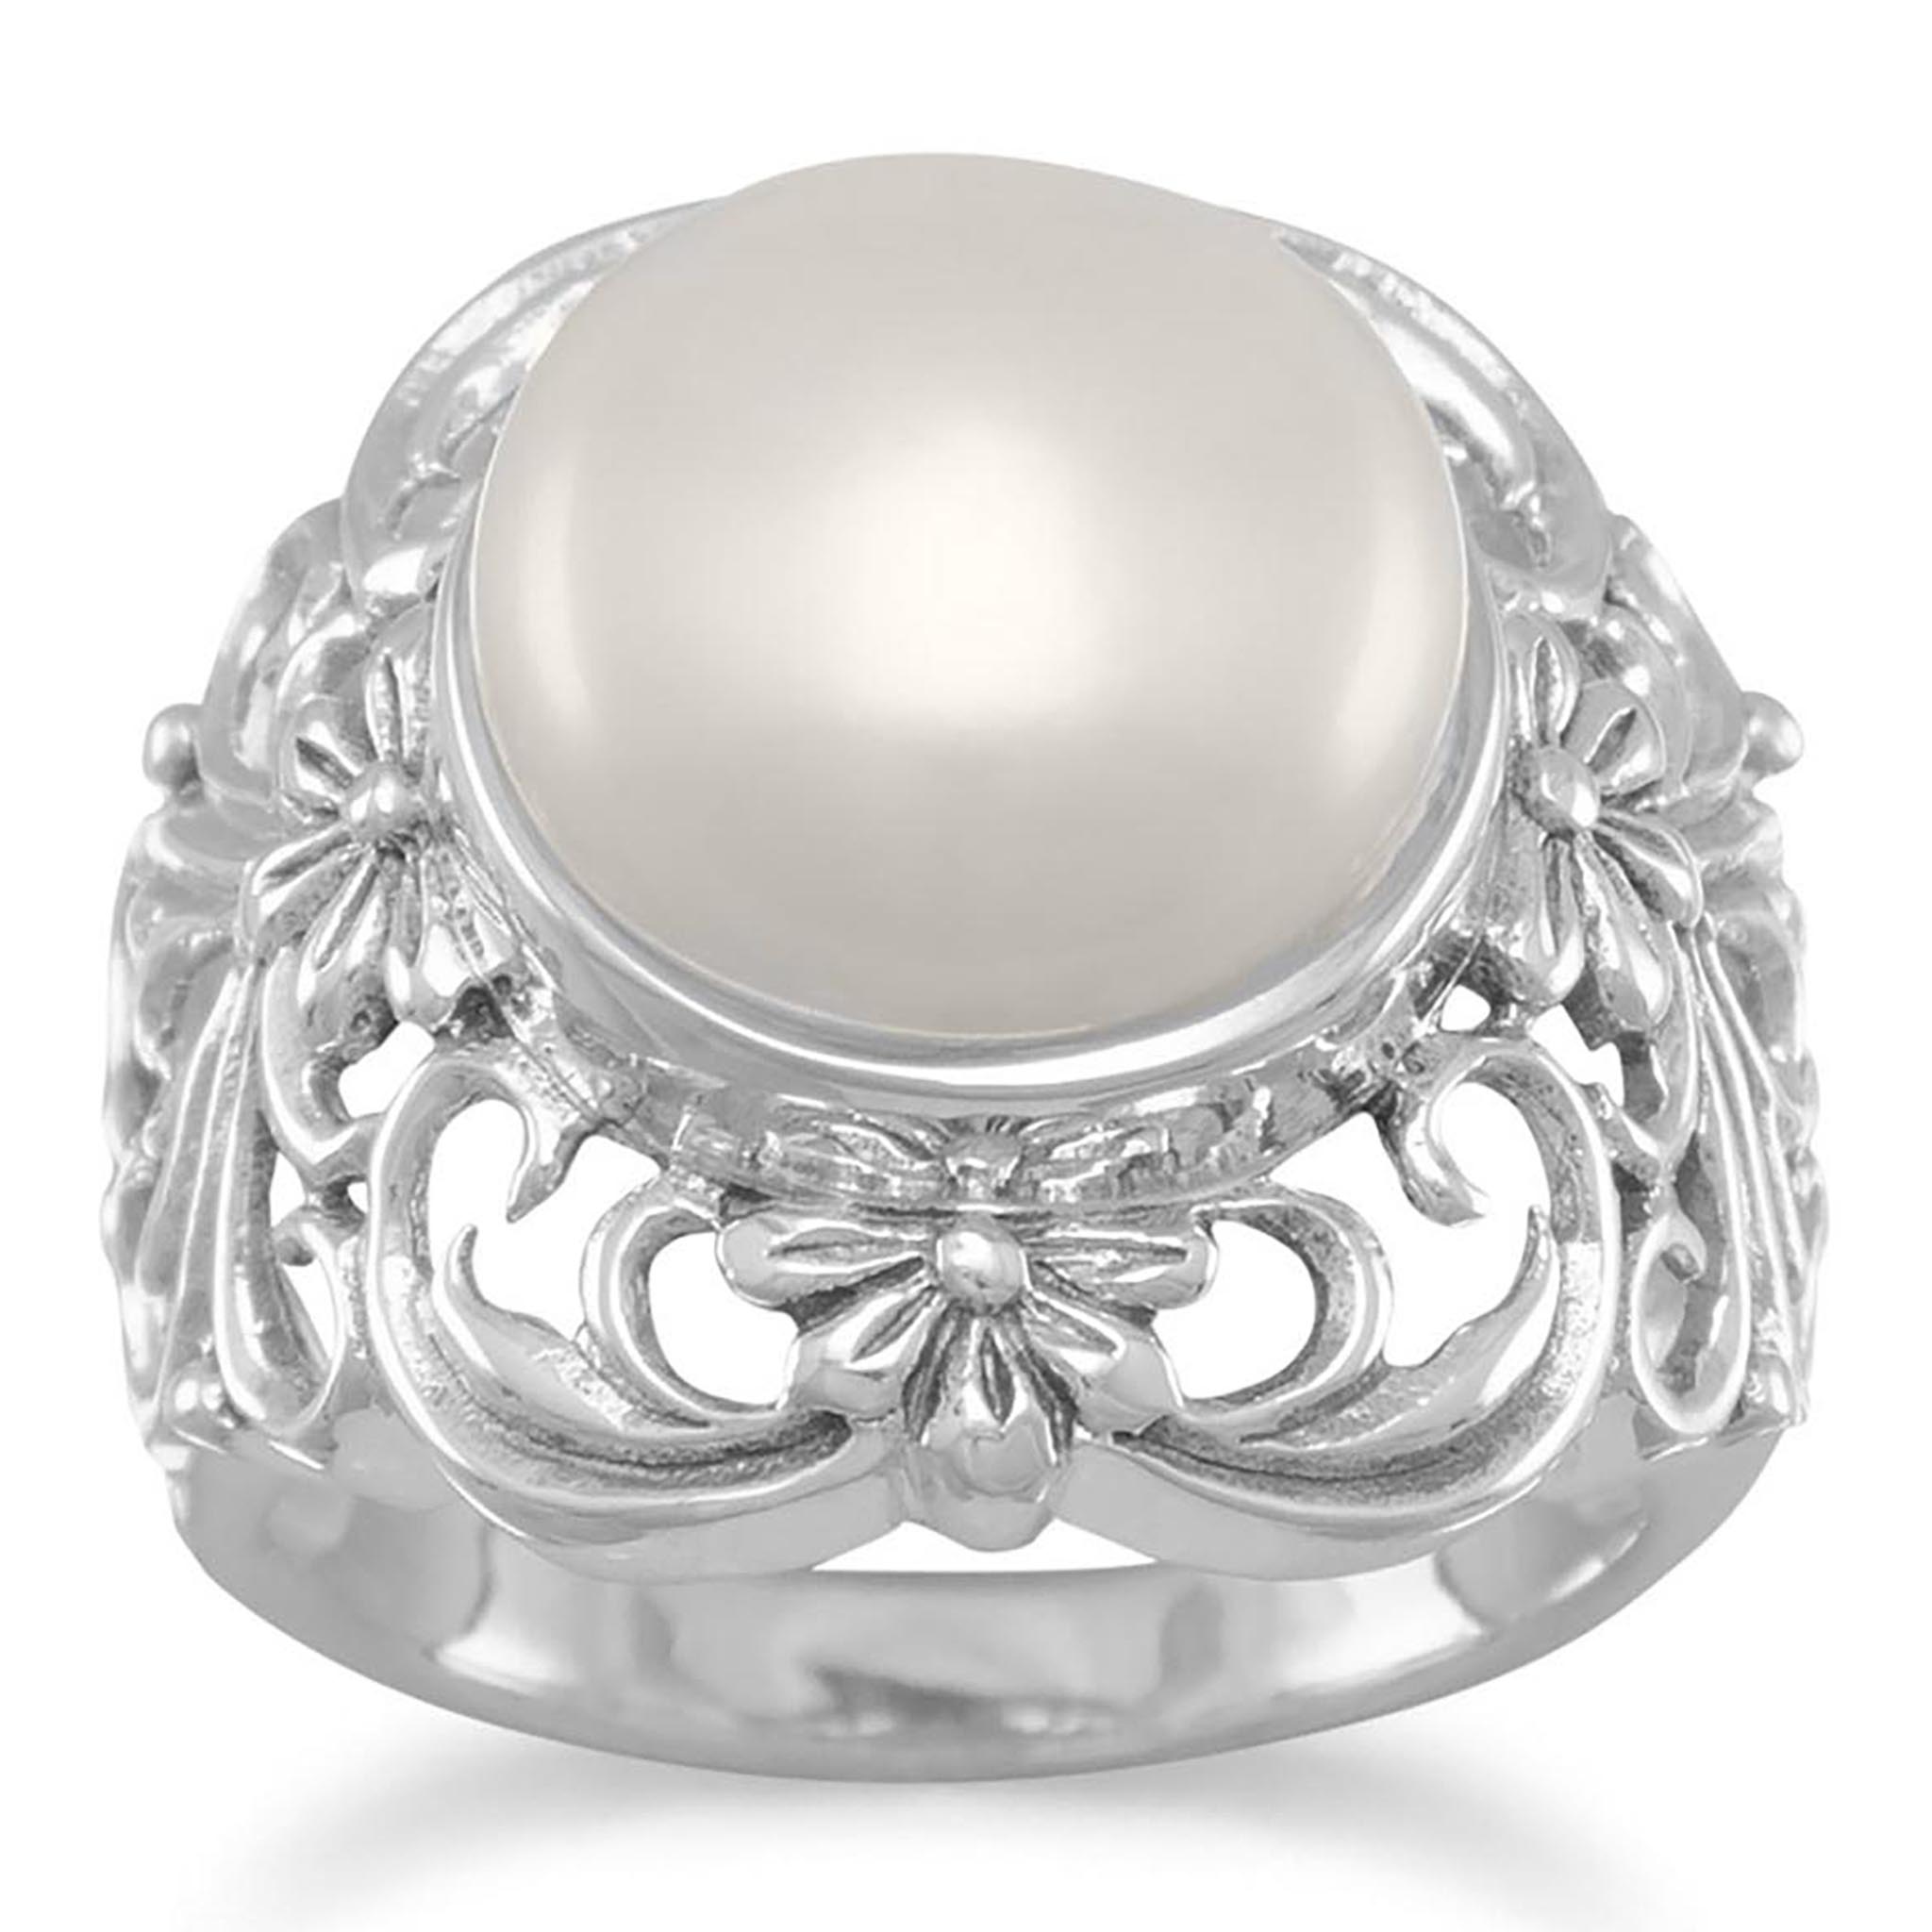 Ornate Cultured Freshwater Pearl Ring